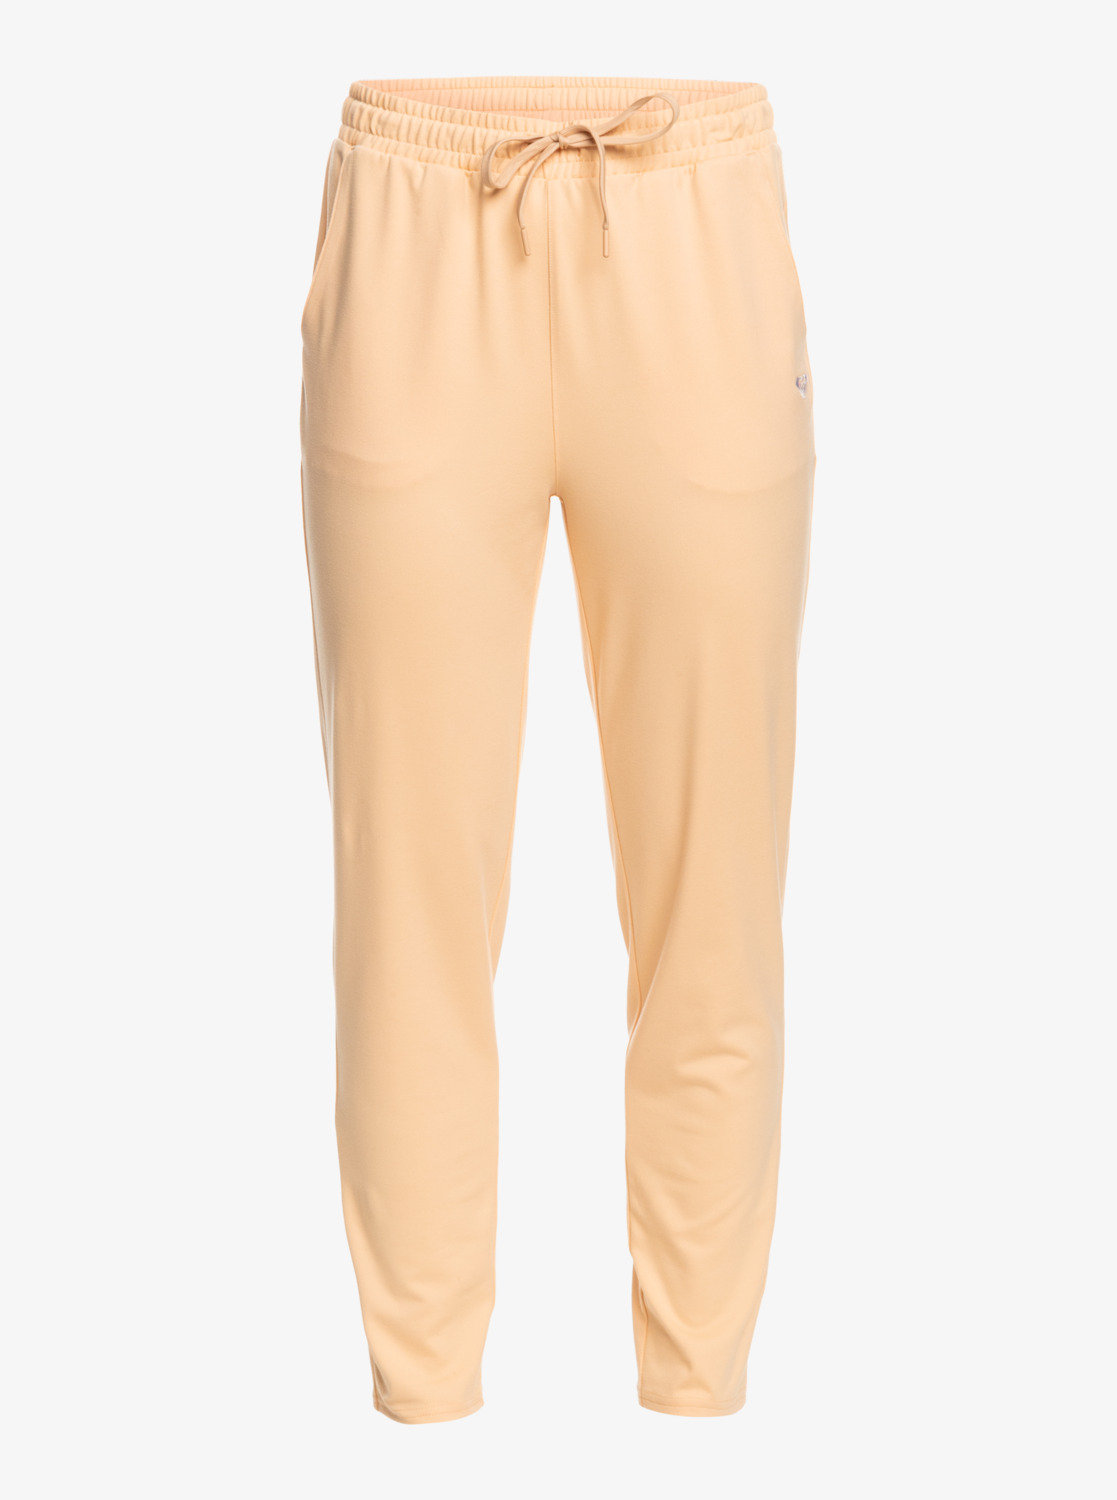 Roxy Rise & Vibe Sports Trousers W Velikost: M